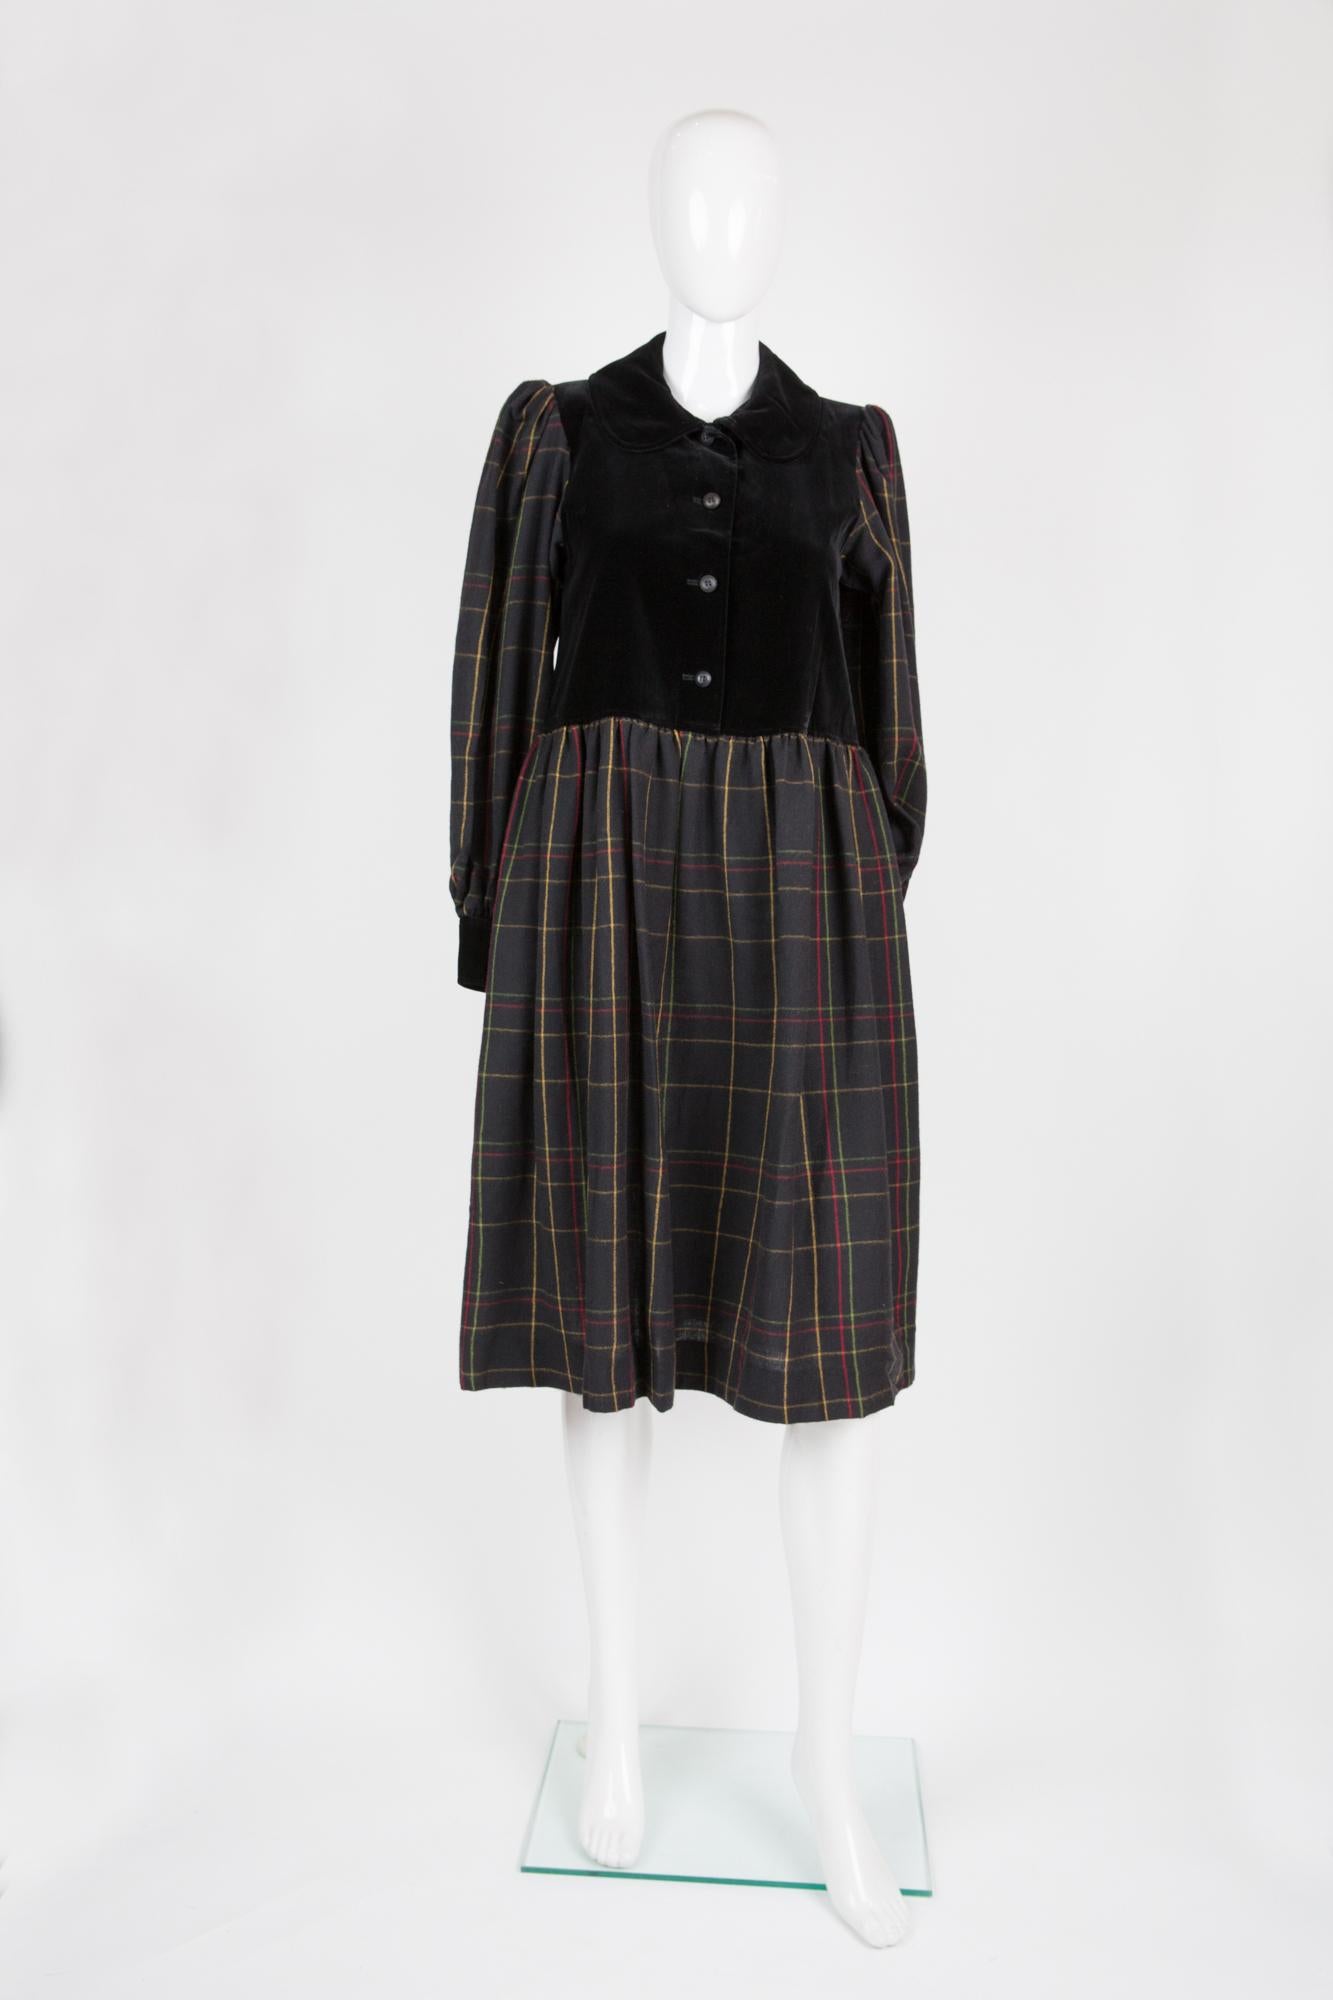 1980s Iconic Yves Saint Laurent velvet and checks dress featuring small shoulder pads, front  buttons,  a velvet top part, a wool check skirt part. 
In excellent vintage condition. 
Made in France. 
Estimated size 36fr/ US4/ UK8
We guarantee you